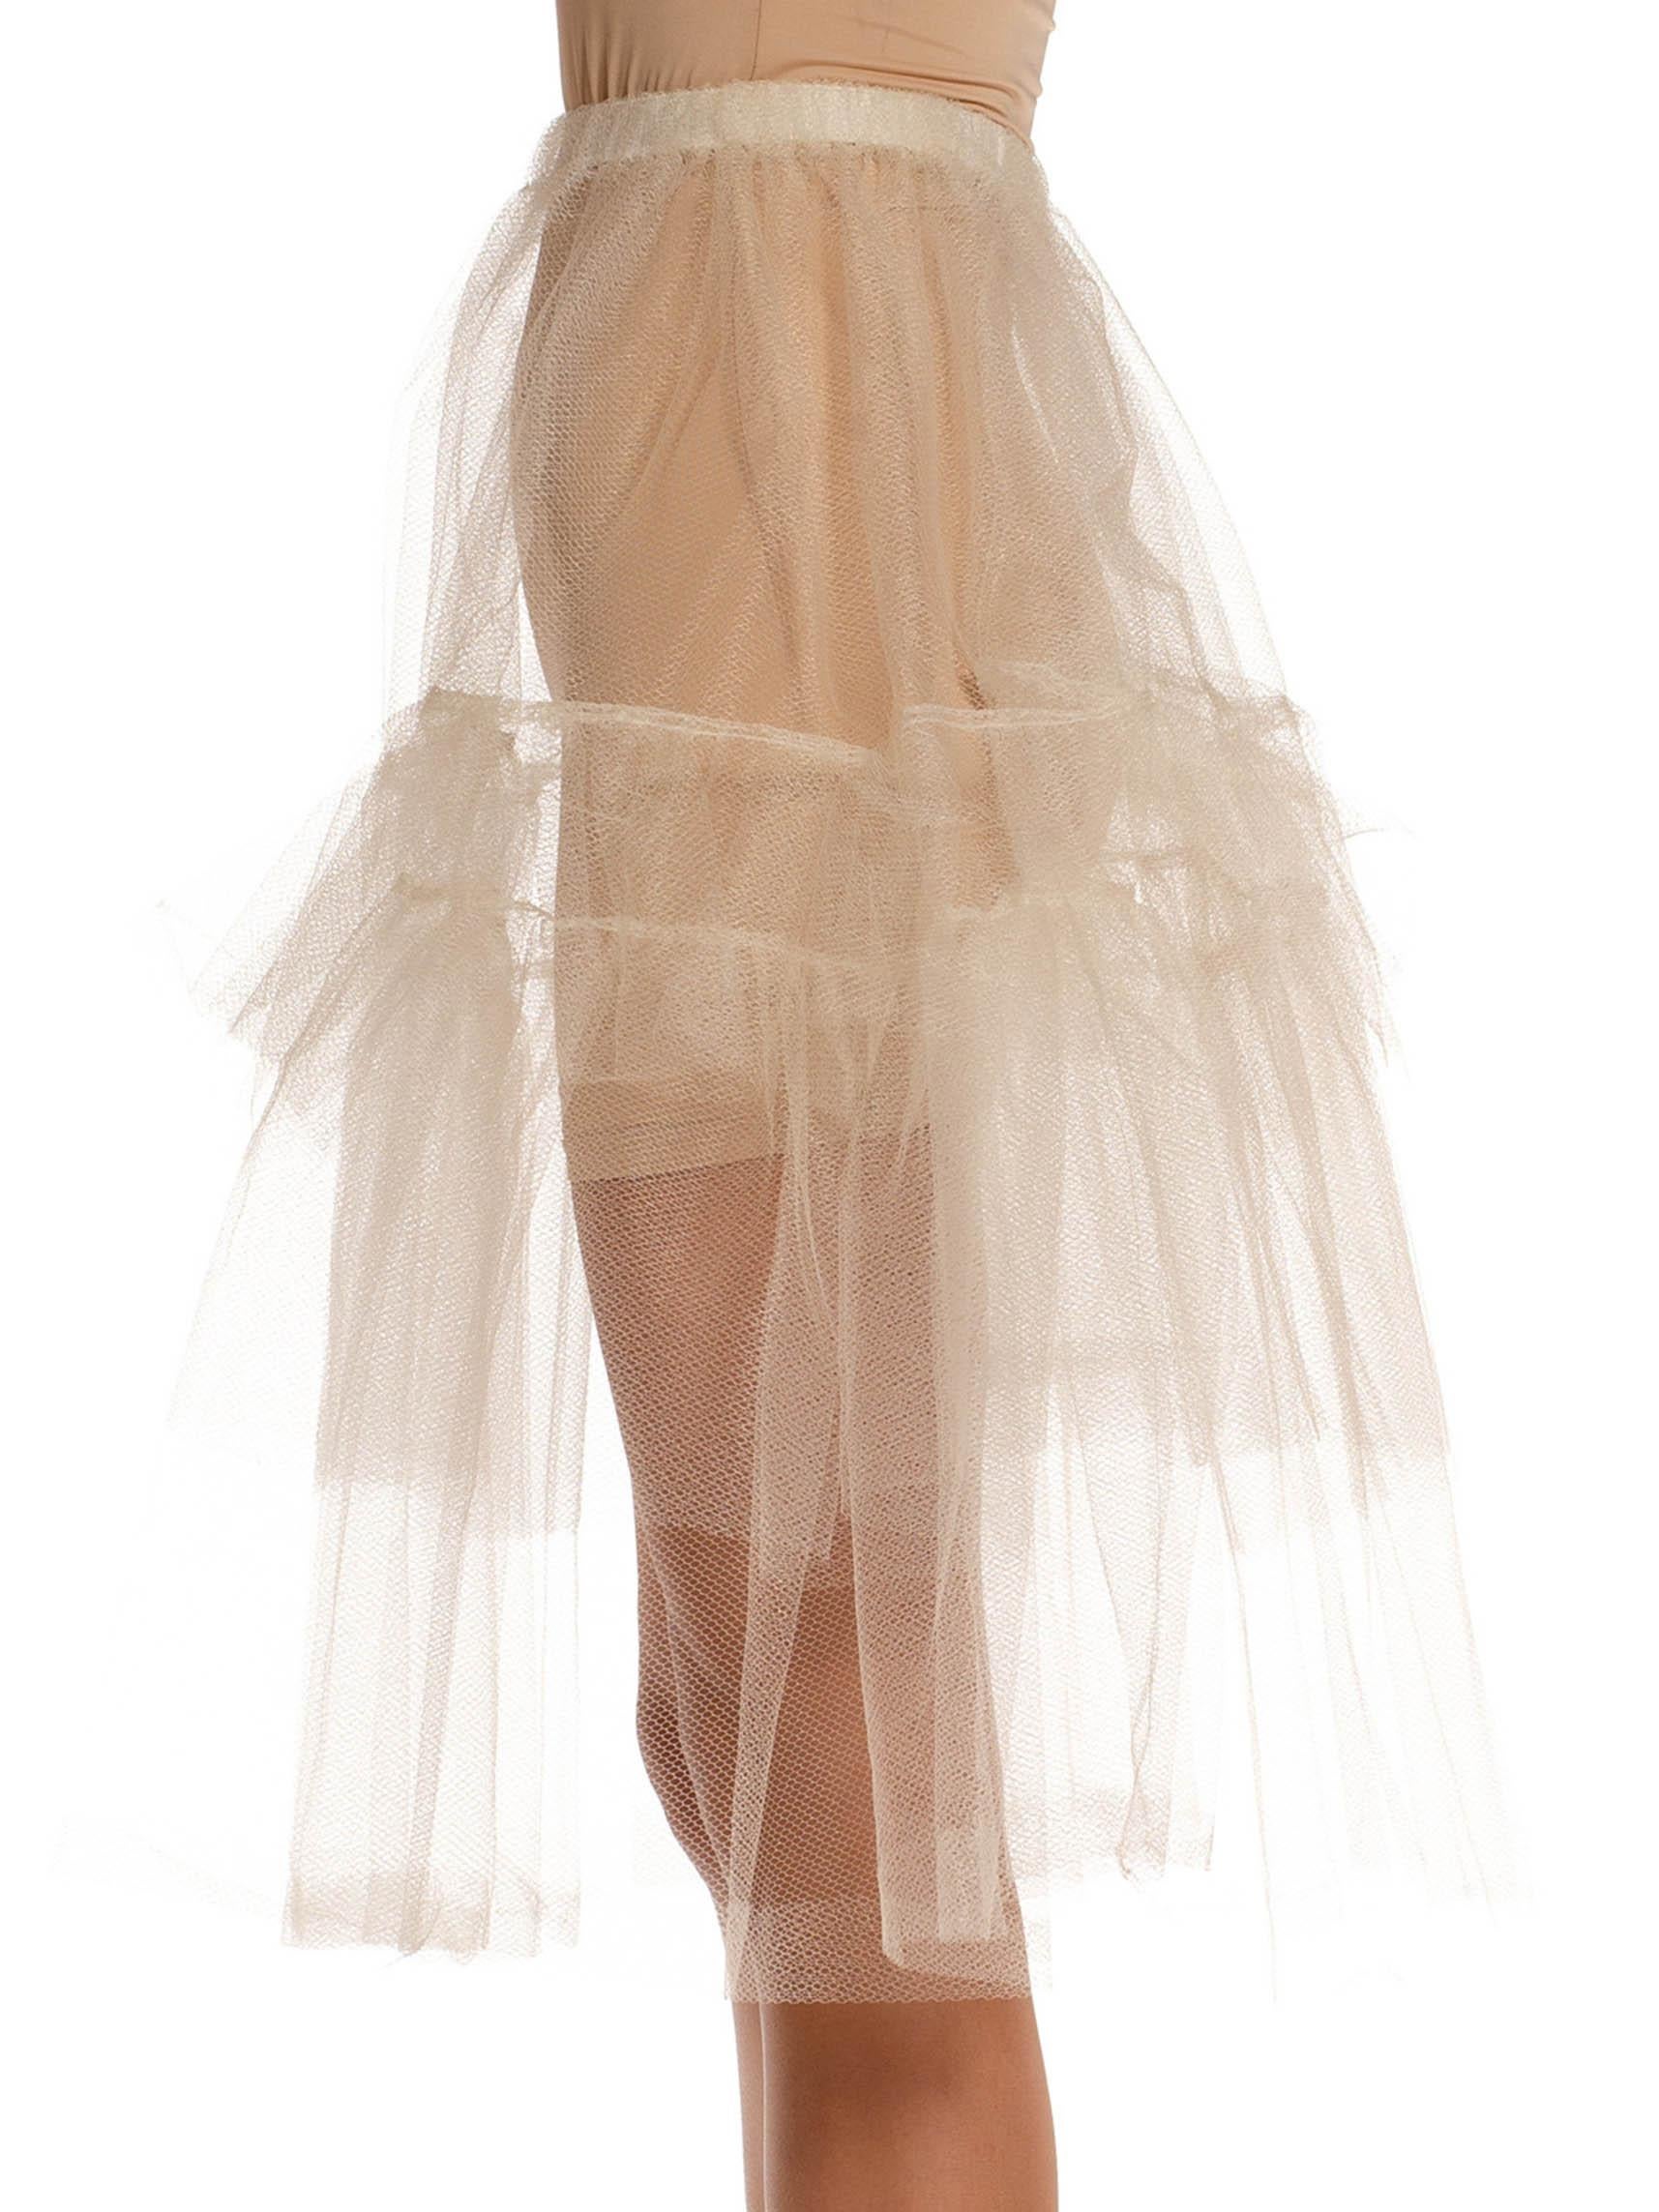 Women's 1980S White Tulle Tiered Tutu Skirt With Elastic Waistband For Sale